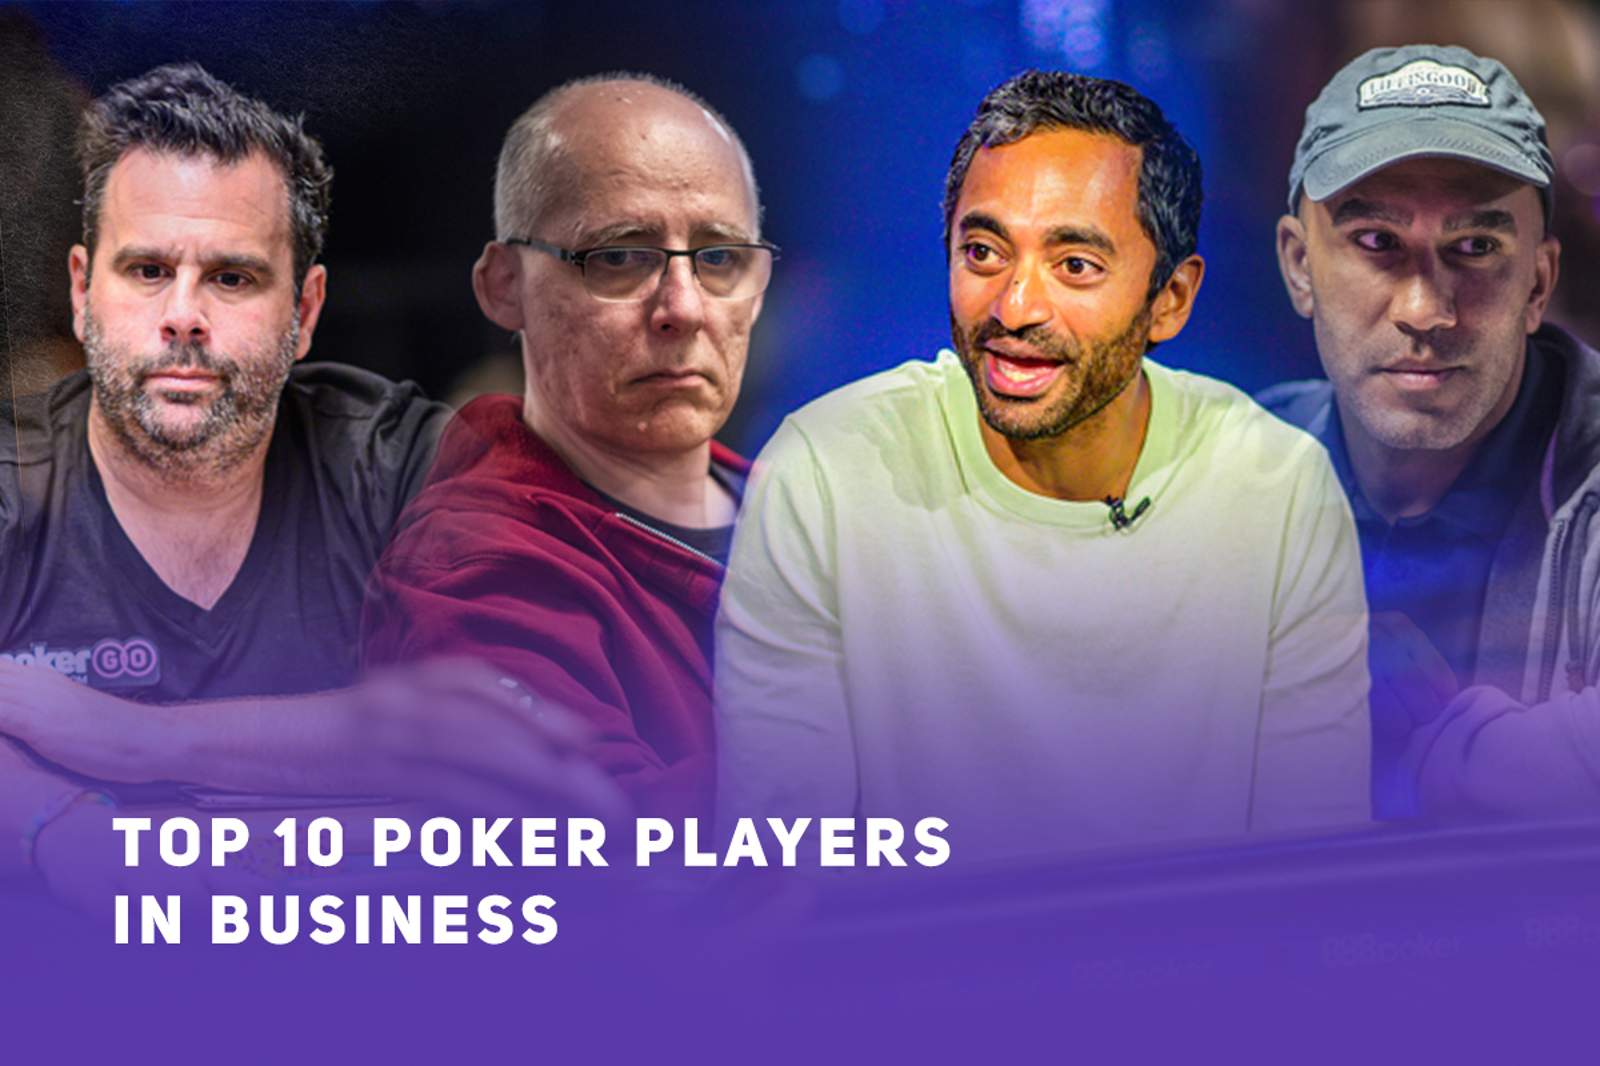 Top 10 Poker Players in Business